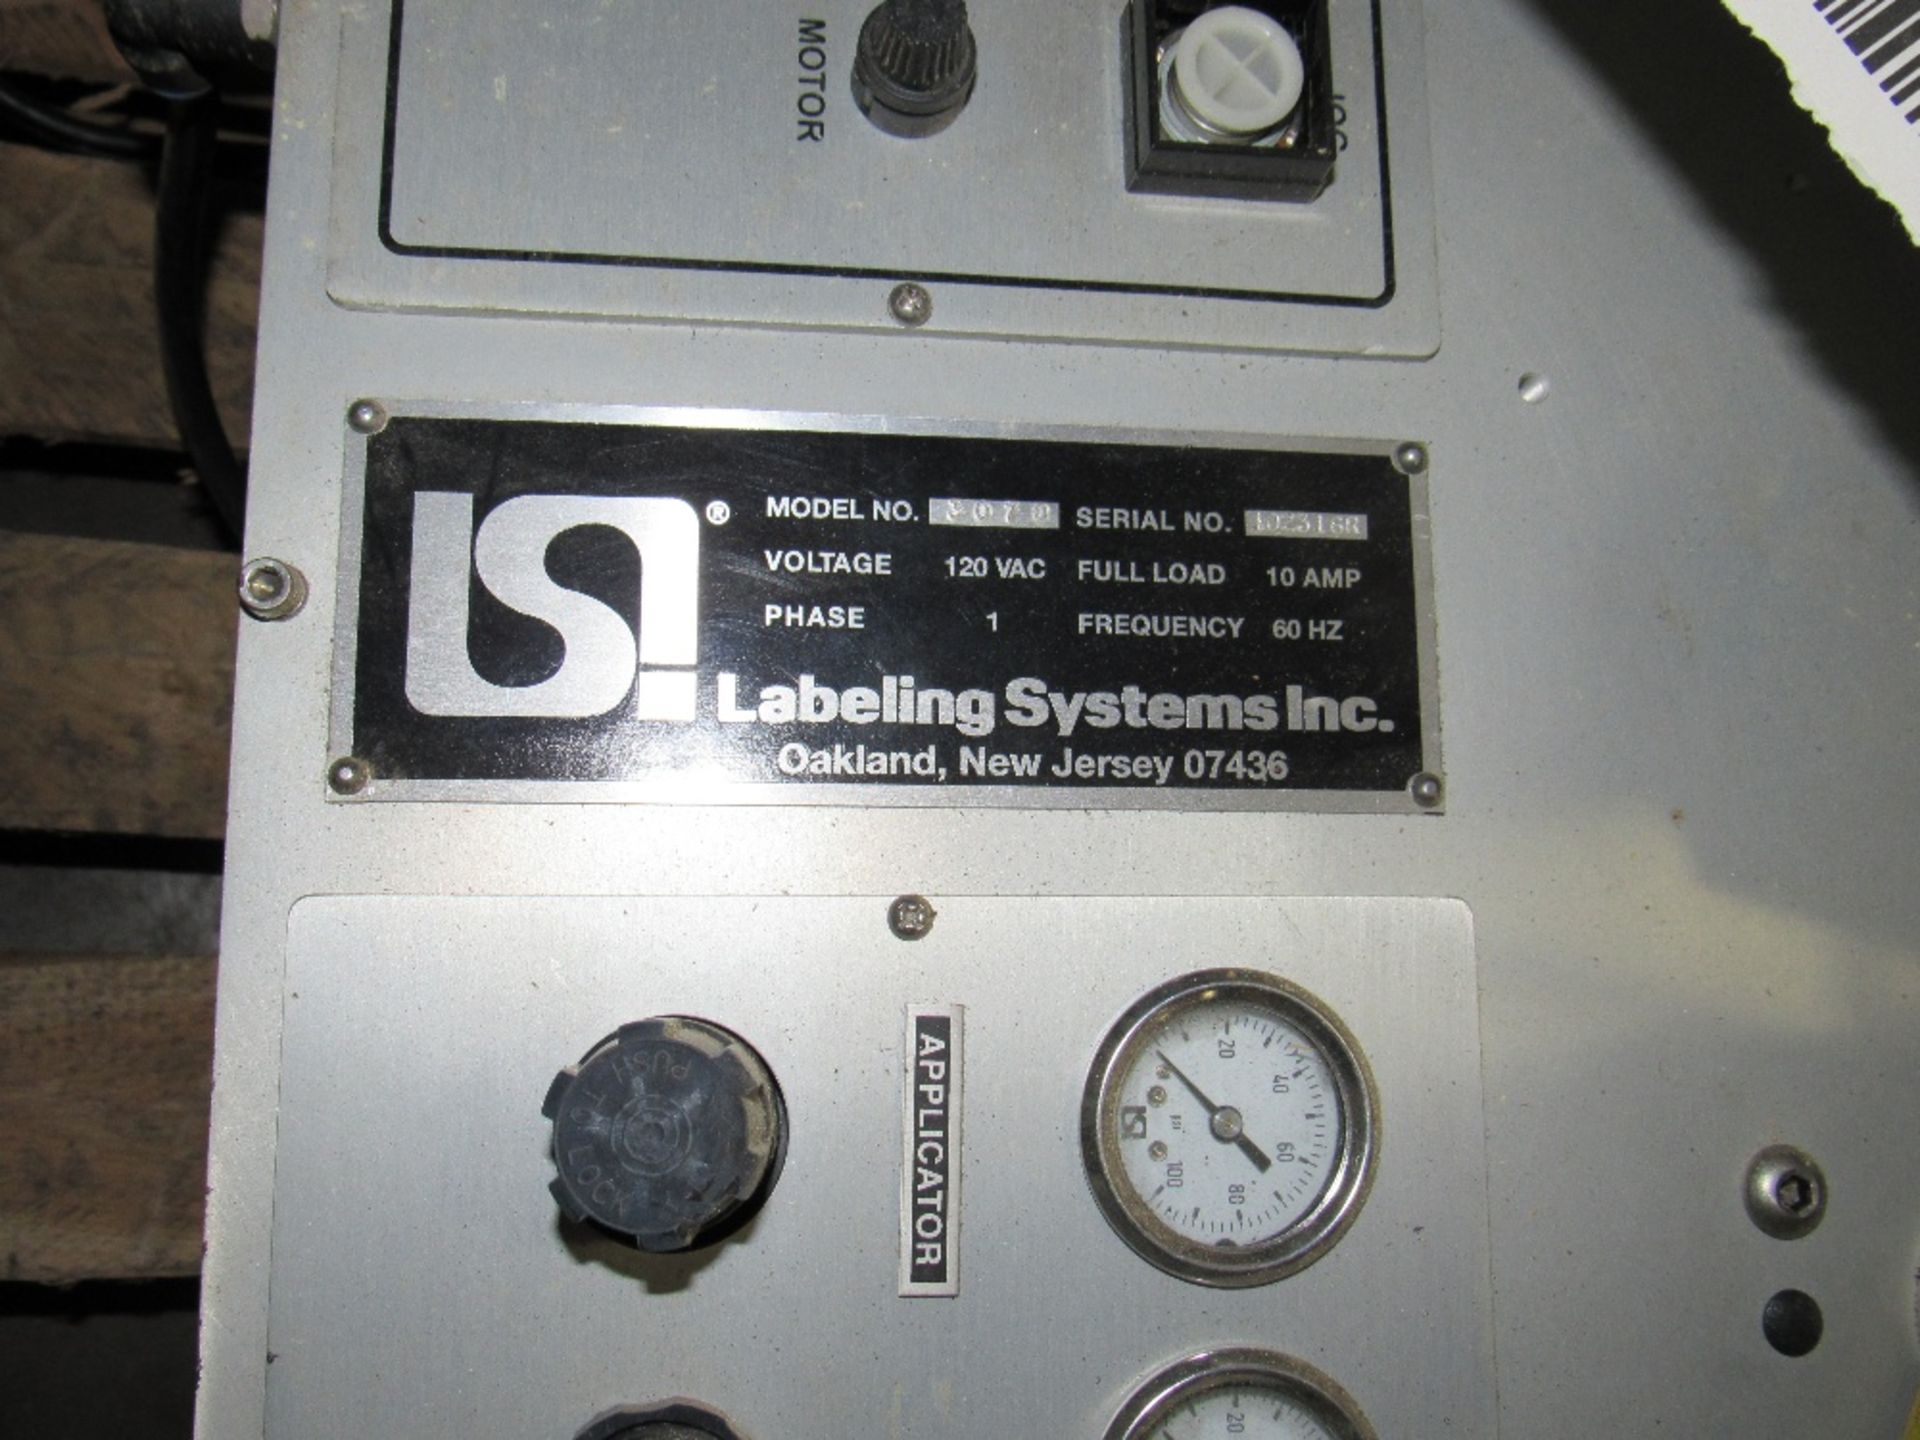 LSI Label Applicator with build in vacuum pump Model 96T0 Serial No. 1023162 designed to apply pre-